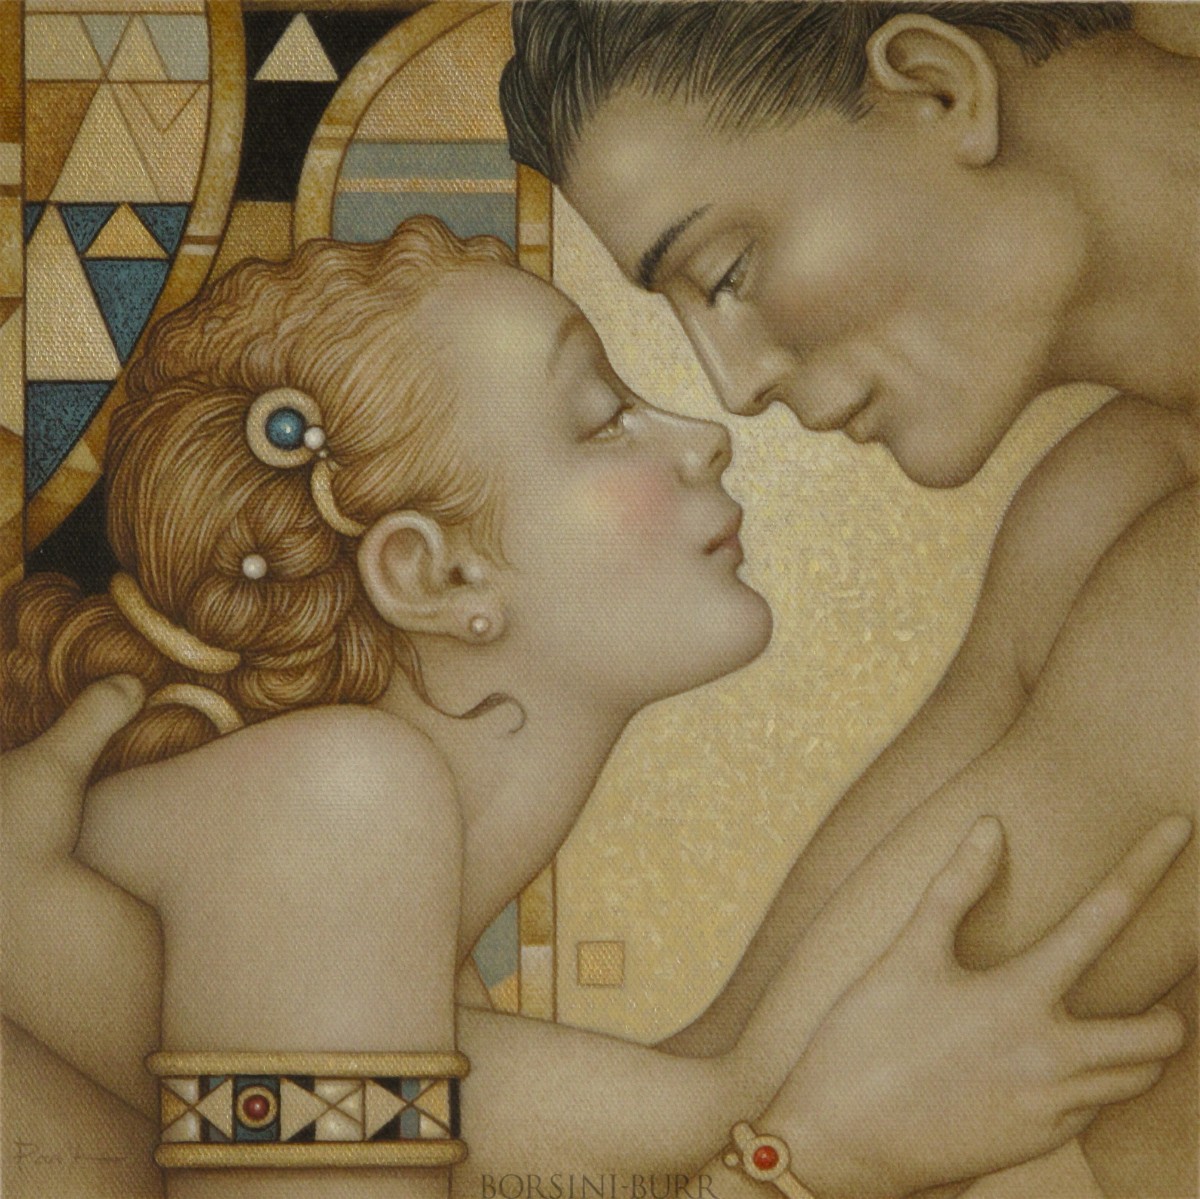 "First Embrace" Original Oil on Canvas by Michael Parkes